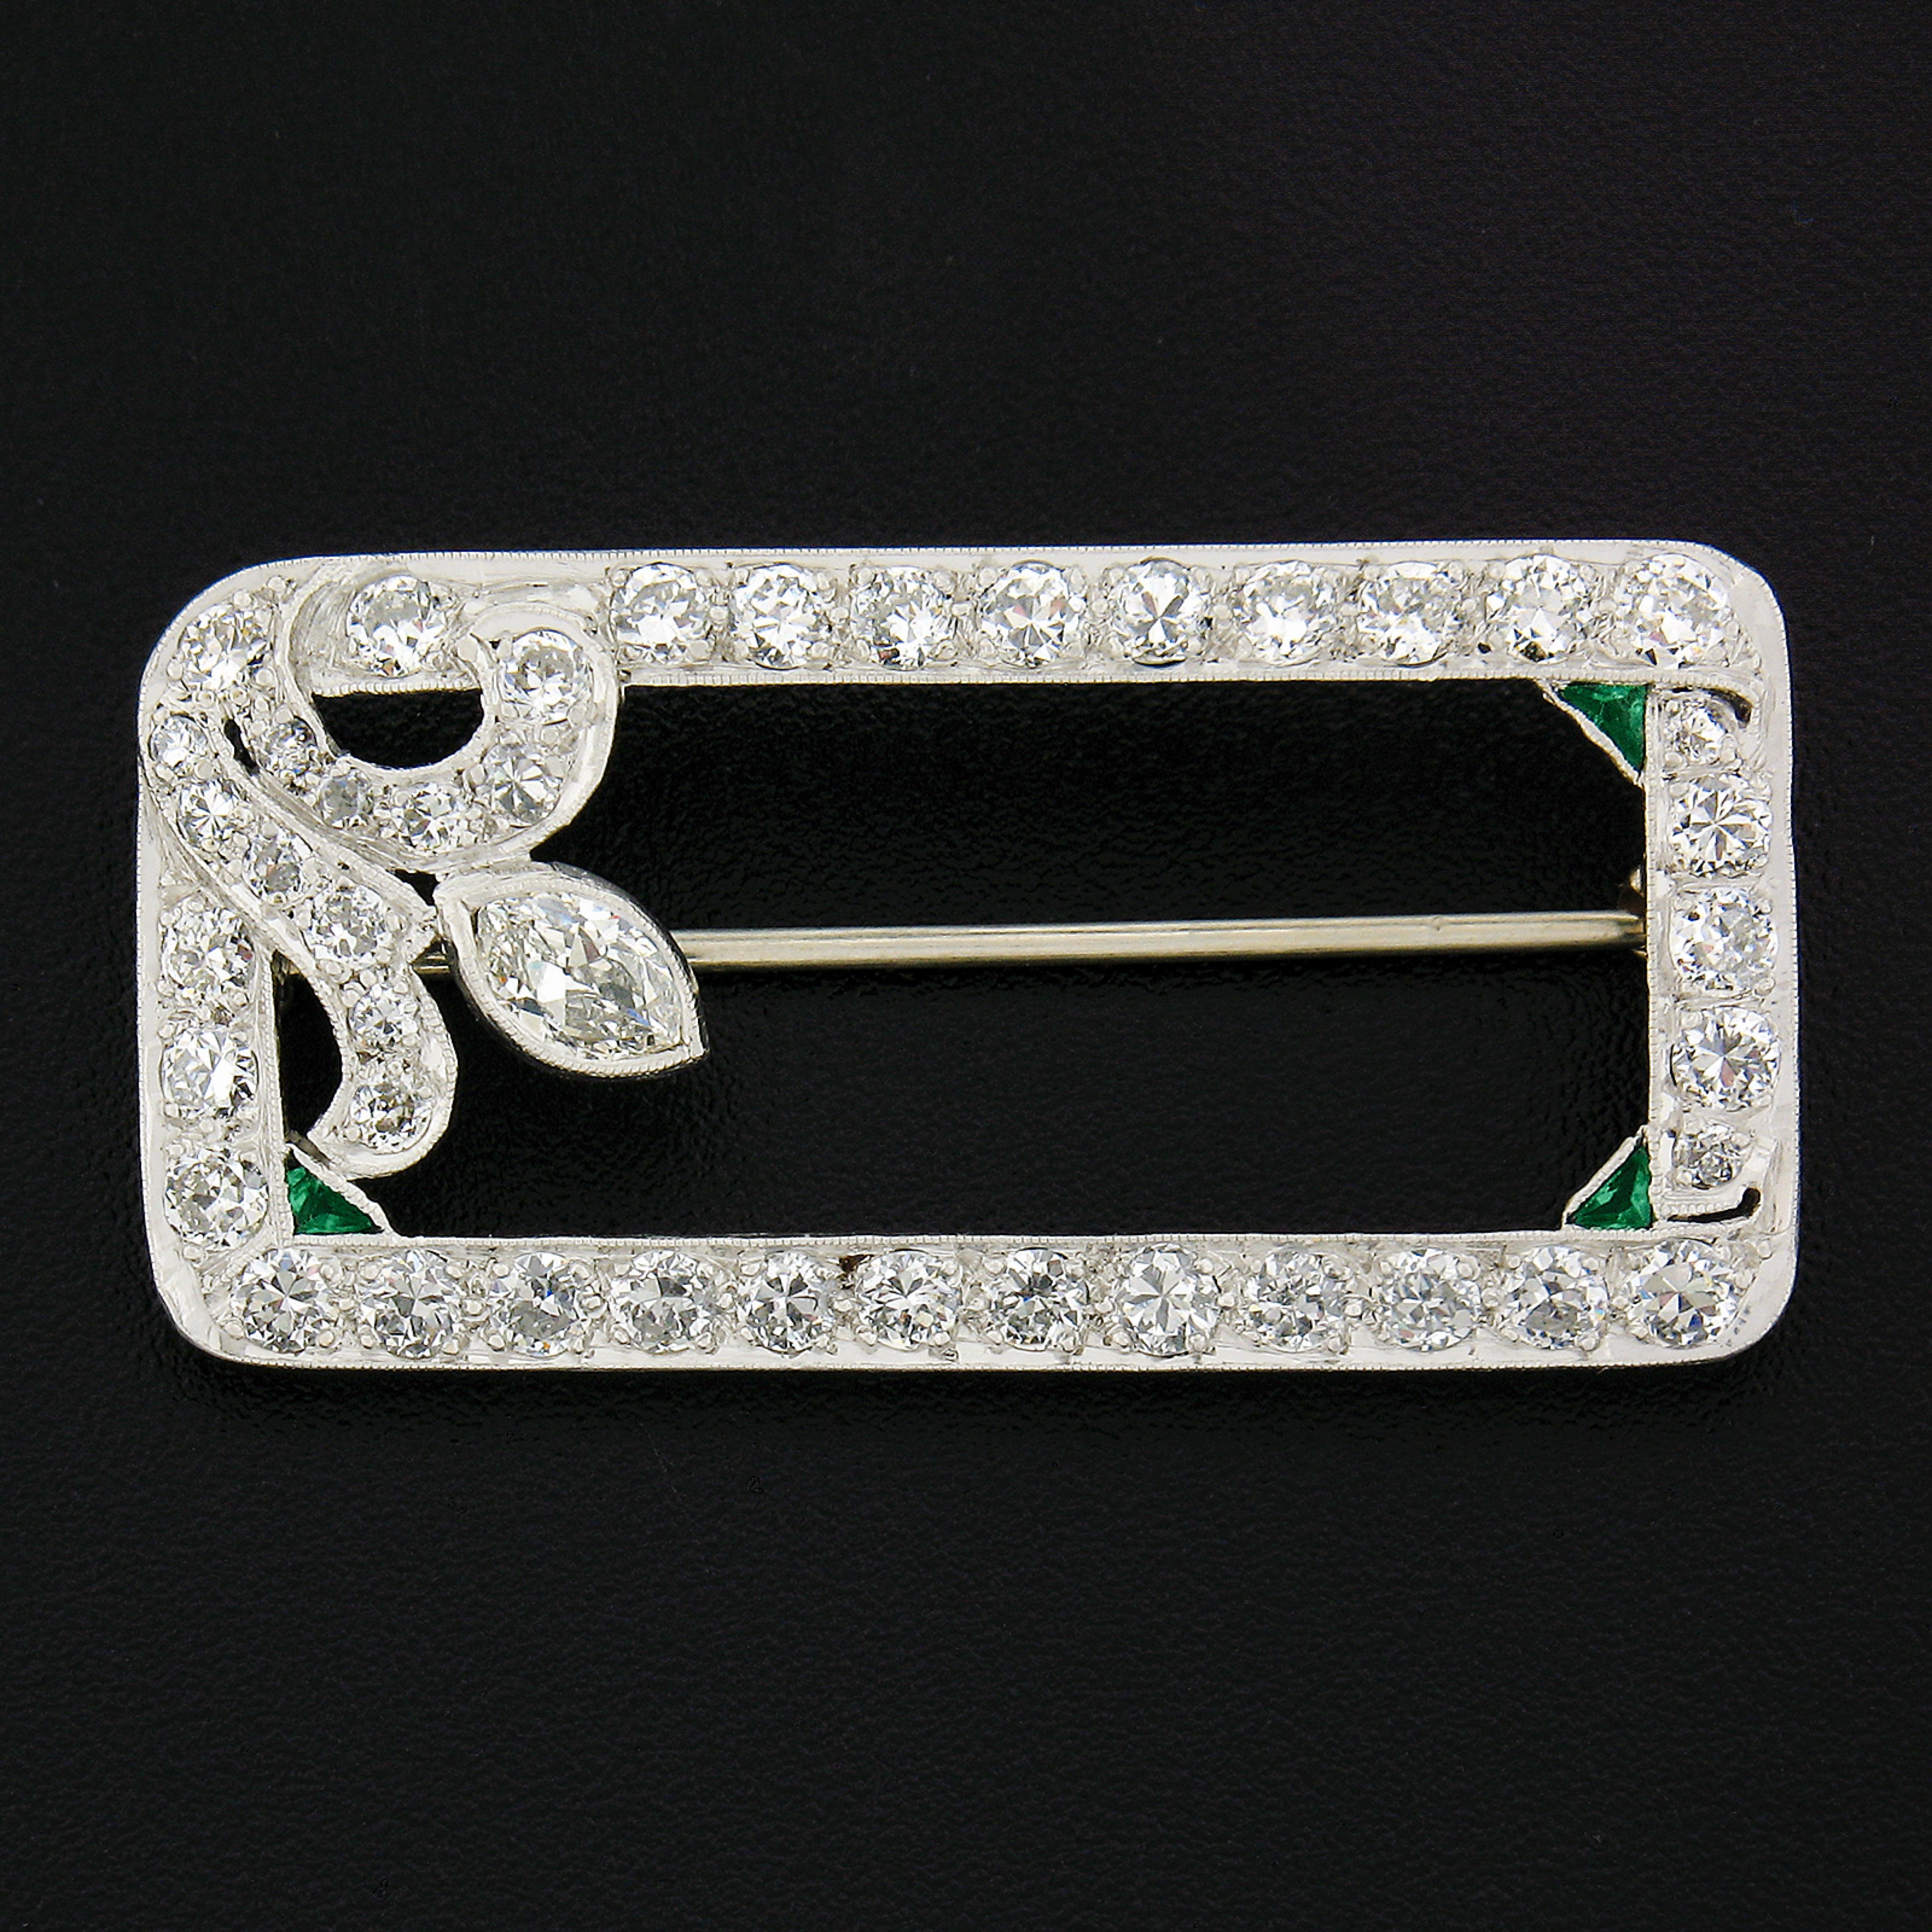 Here we have a stunning art deco diamond brooch crafted in solid platinum.  3 corners of the inside rectangle are adorned with 3 triangular cut emeralds with beautiful green color that set in bezel Milgrain settings. The brooch  is completely